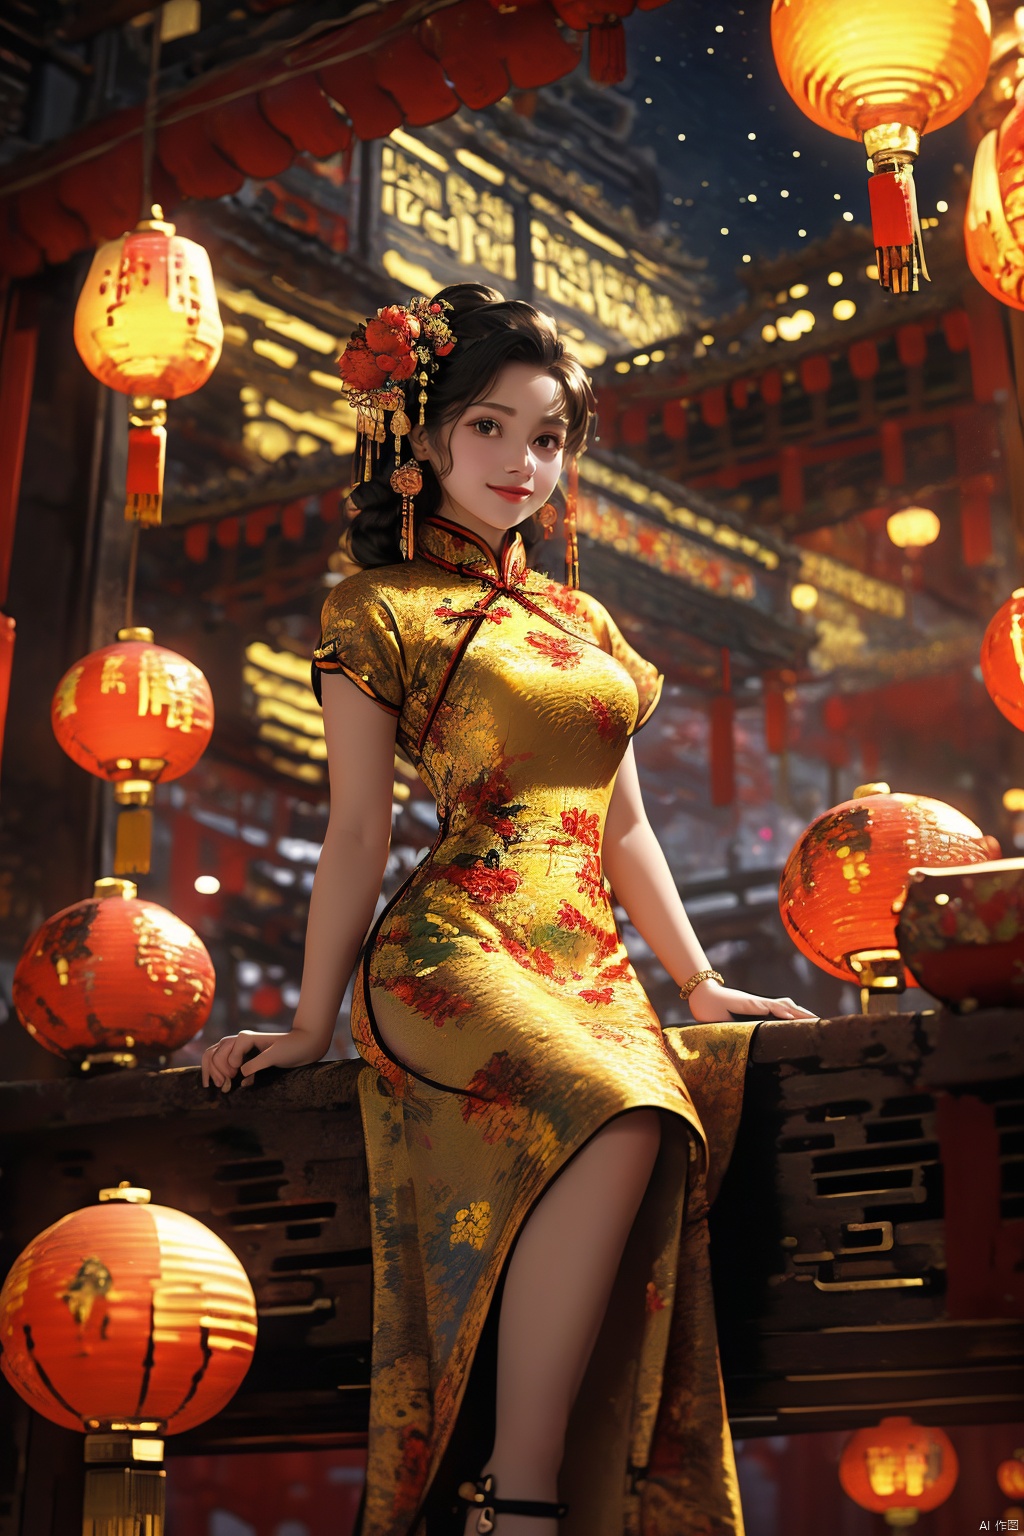  ((poakl)), chinese,(Global lighting, realism, ray tracing, HDR, rendering, reasonable design, high detail, masterpiece, best quality, ultra-high definition, movie lighting), 1 girl, looking at the audience, Chinese long dress (qipao), qipao pattern (Van Gogh's starry sky), headwear, necklace, earrings, crystals, jewelry, playful posture, smile, plump body, slender legs, young girl's body proportion, depth of field, blurred background, Chinese architectural interior (local), Chinese style, (high quality), best quality, (masterpiece), blurry background, rich colors, fine details, surrealism, 50mm lens, relaxed atmosphere. Portrait photography, 35mm film, naturally blurry, , chinese